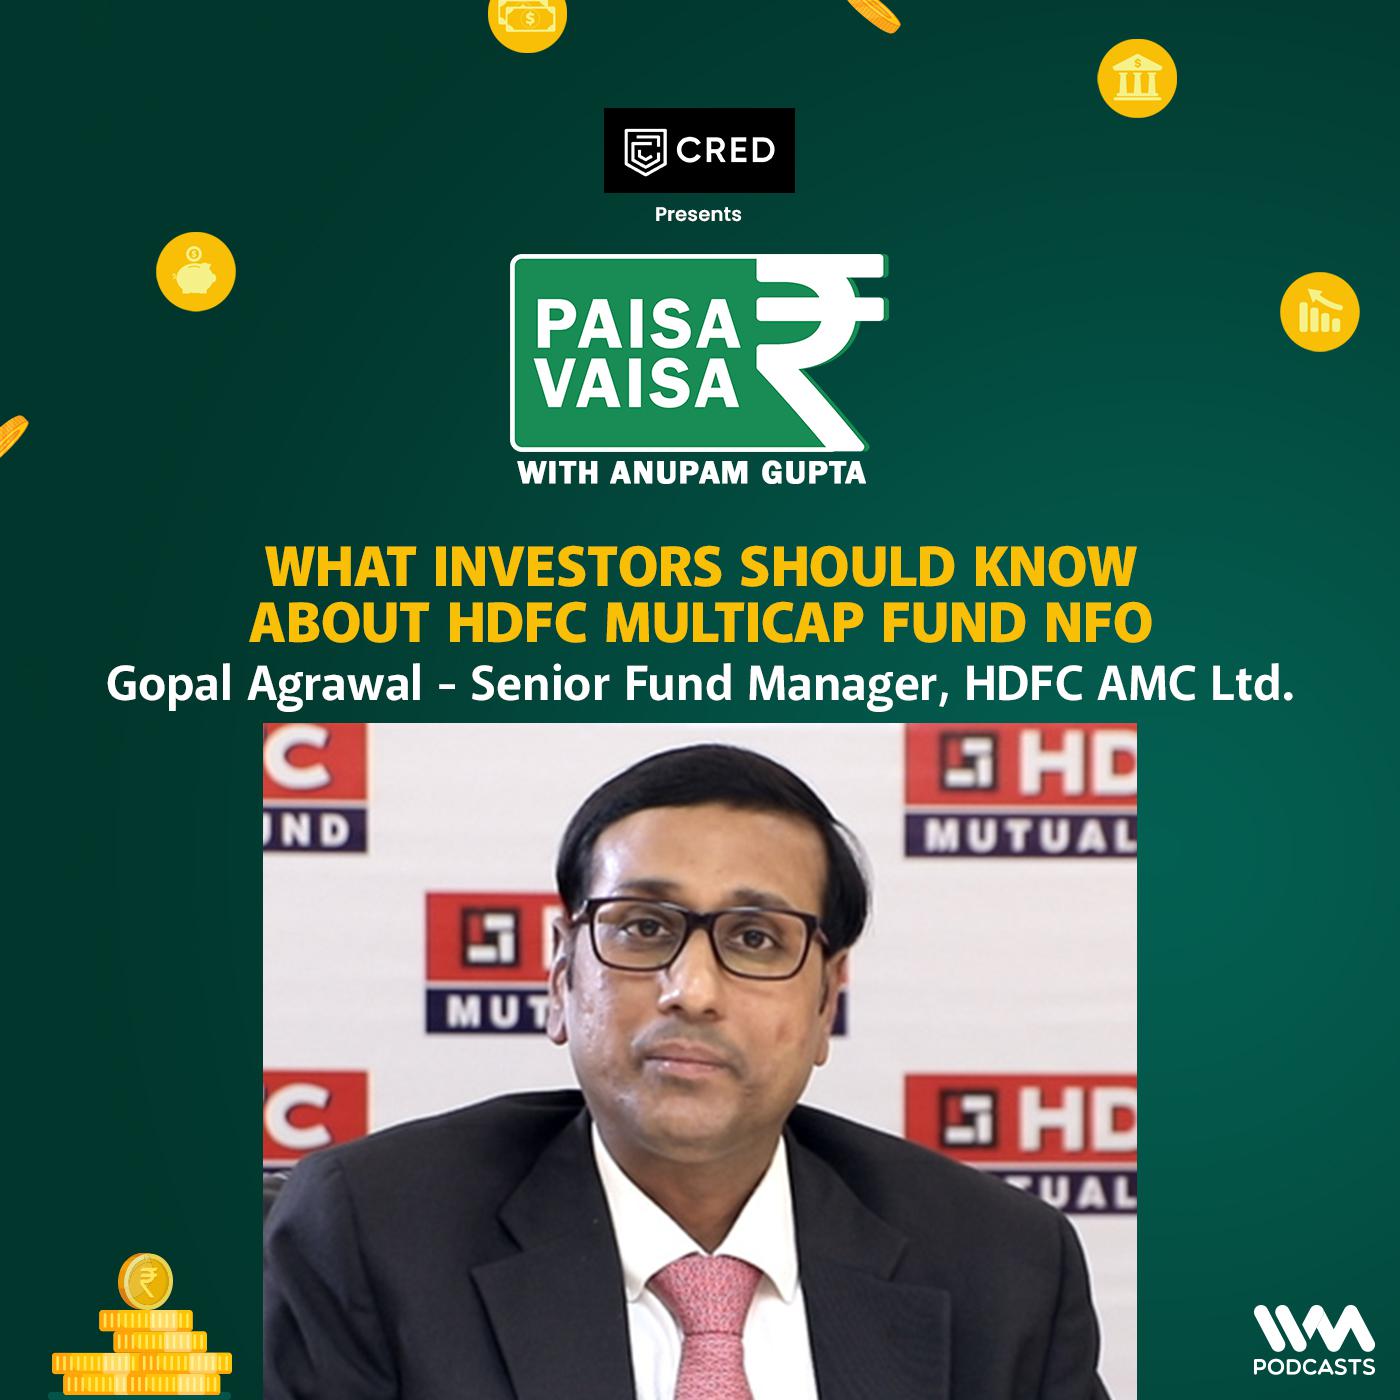 What investors should know about HDFC Multicap Fund NFO